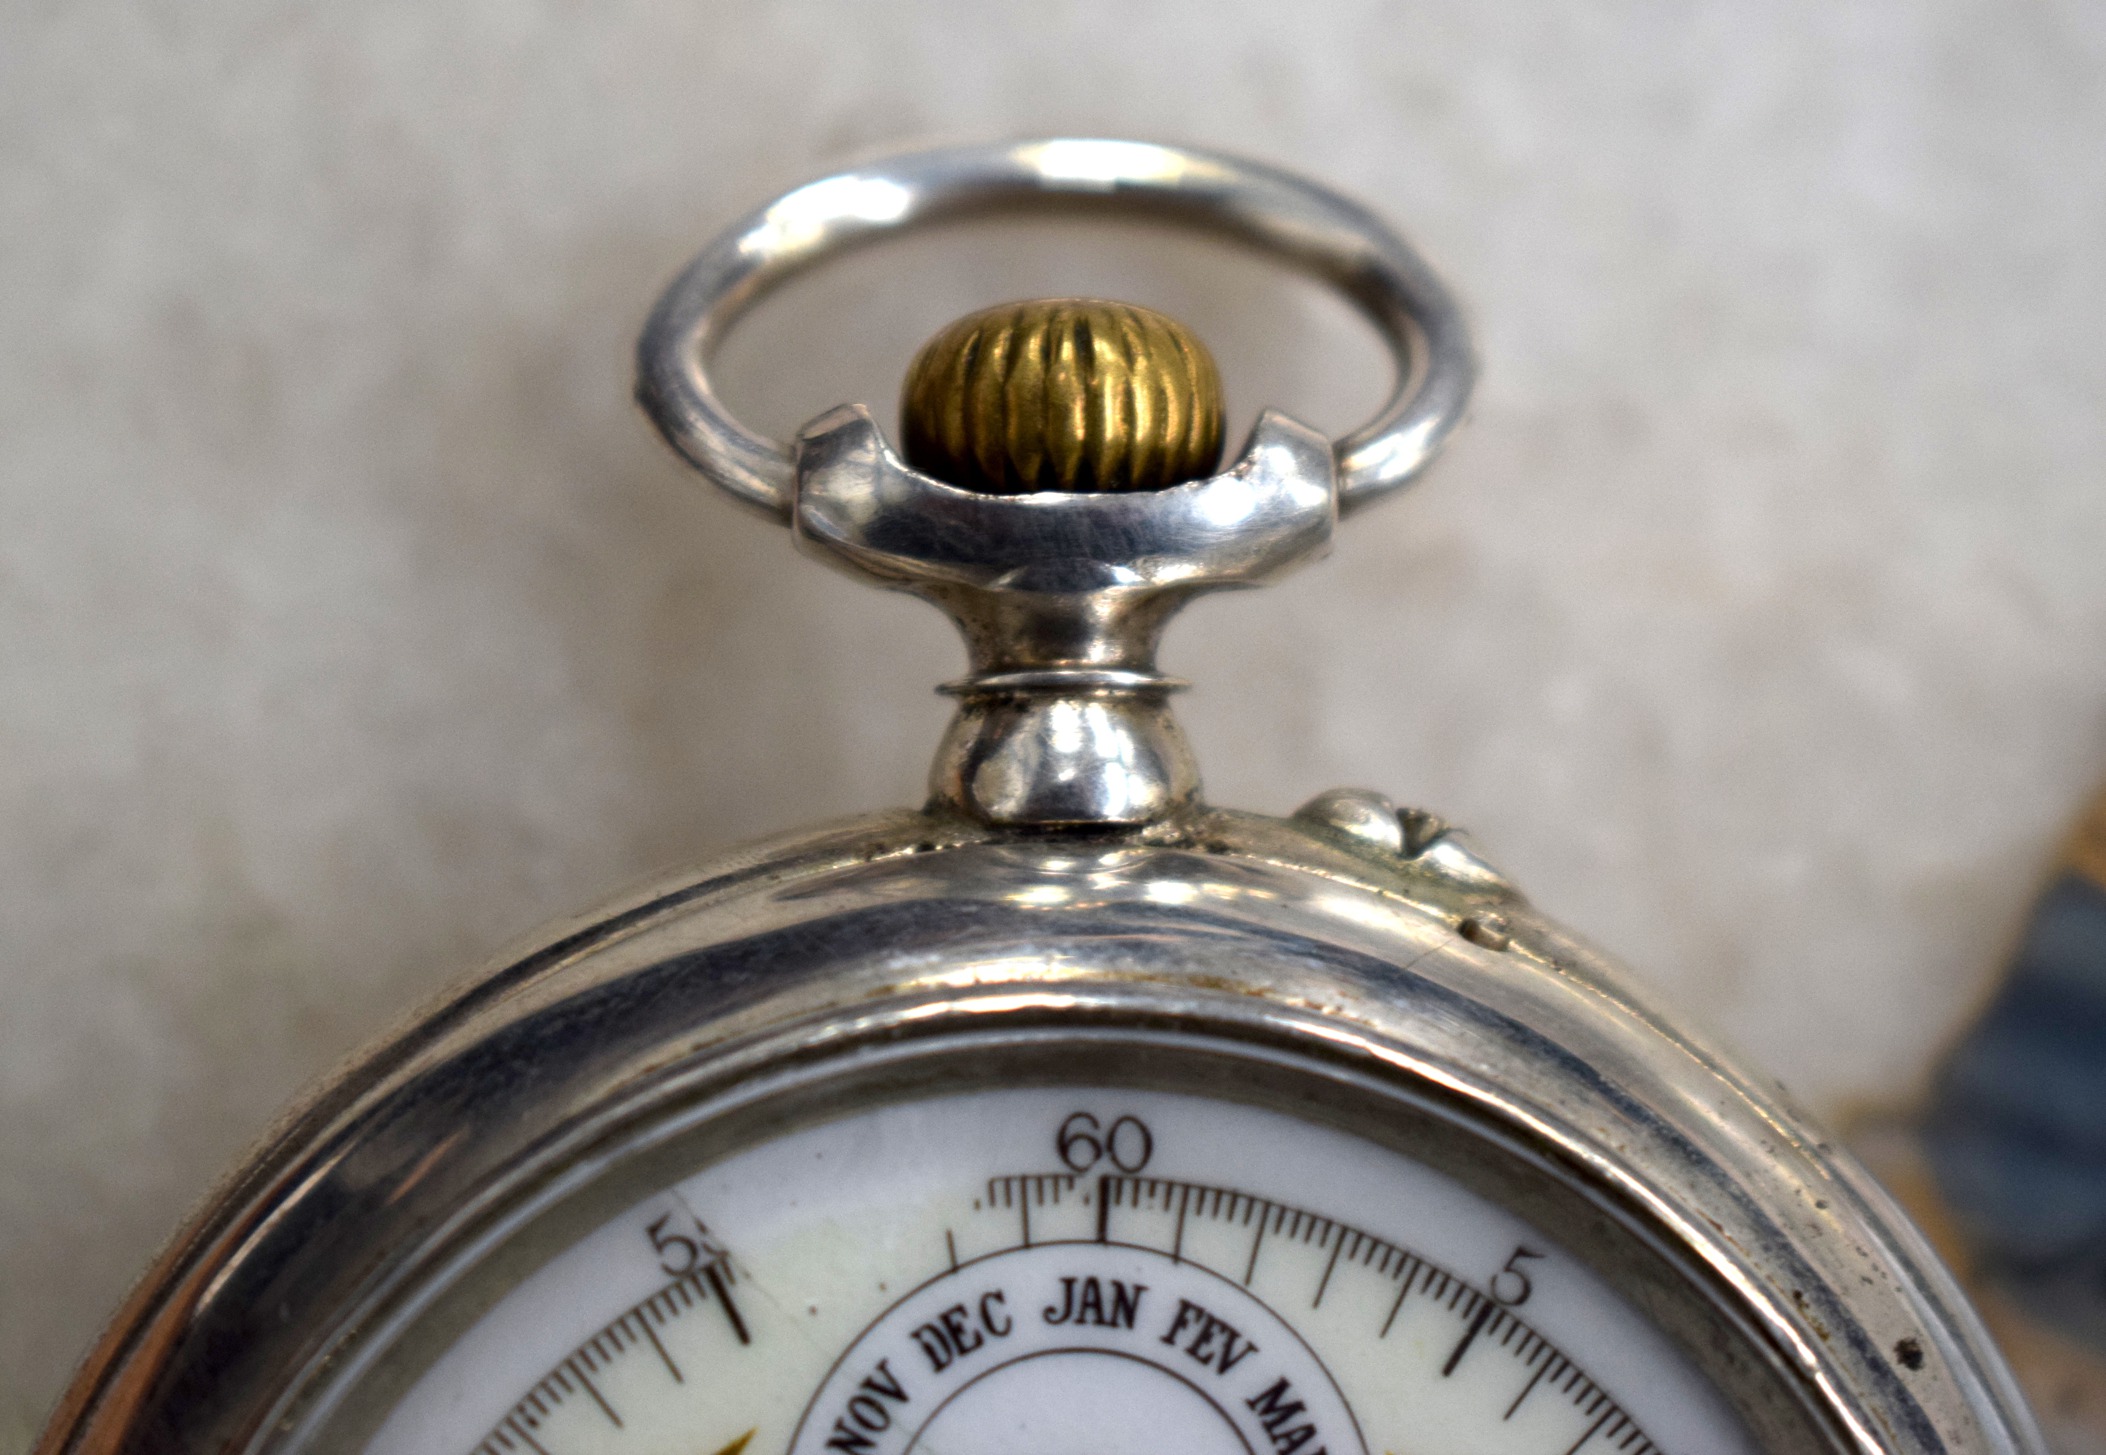 A RARE ANTIQUE PATEK PHILLIPE SILVER TRIPLE DIAL POCKET WATCH with gold and blue highlights. 5.5 - Image 5 of 11